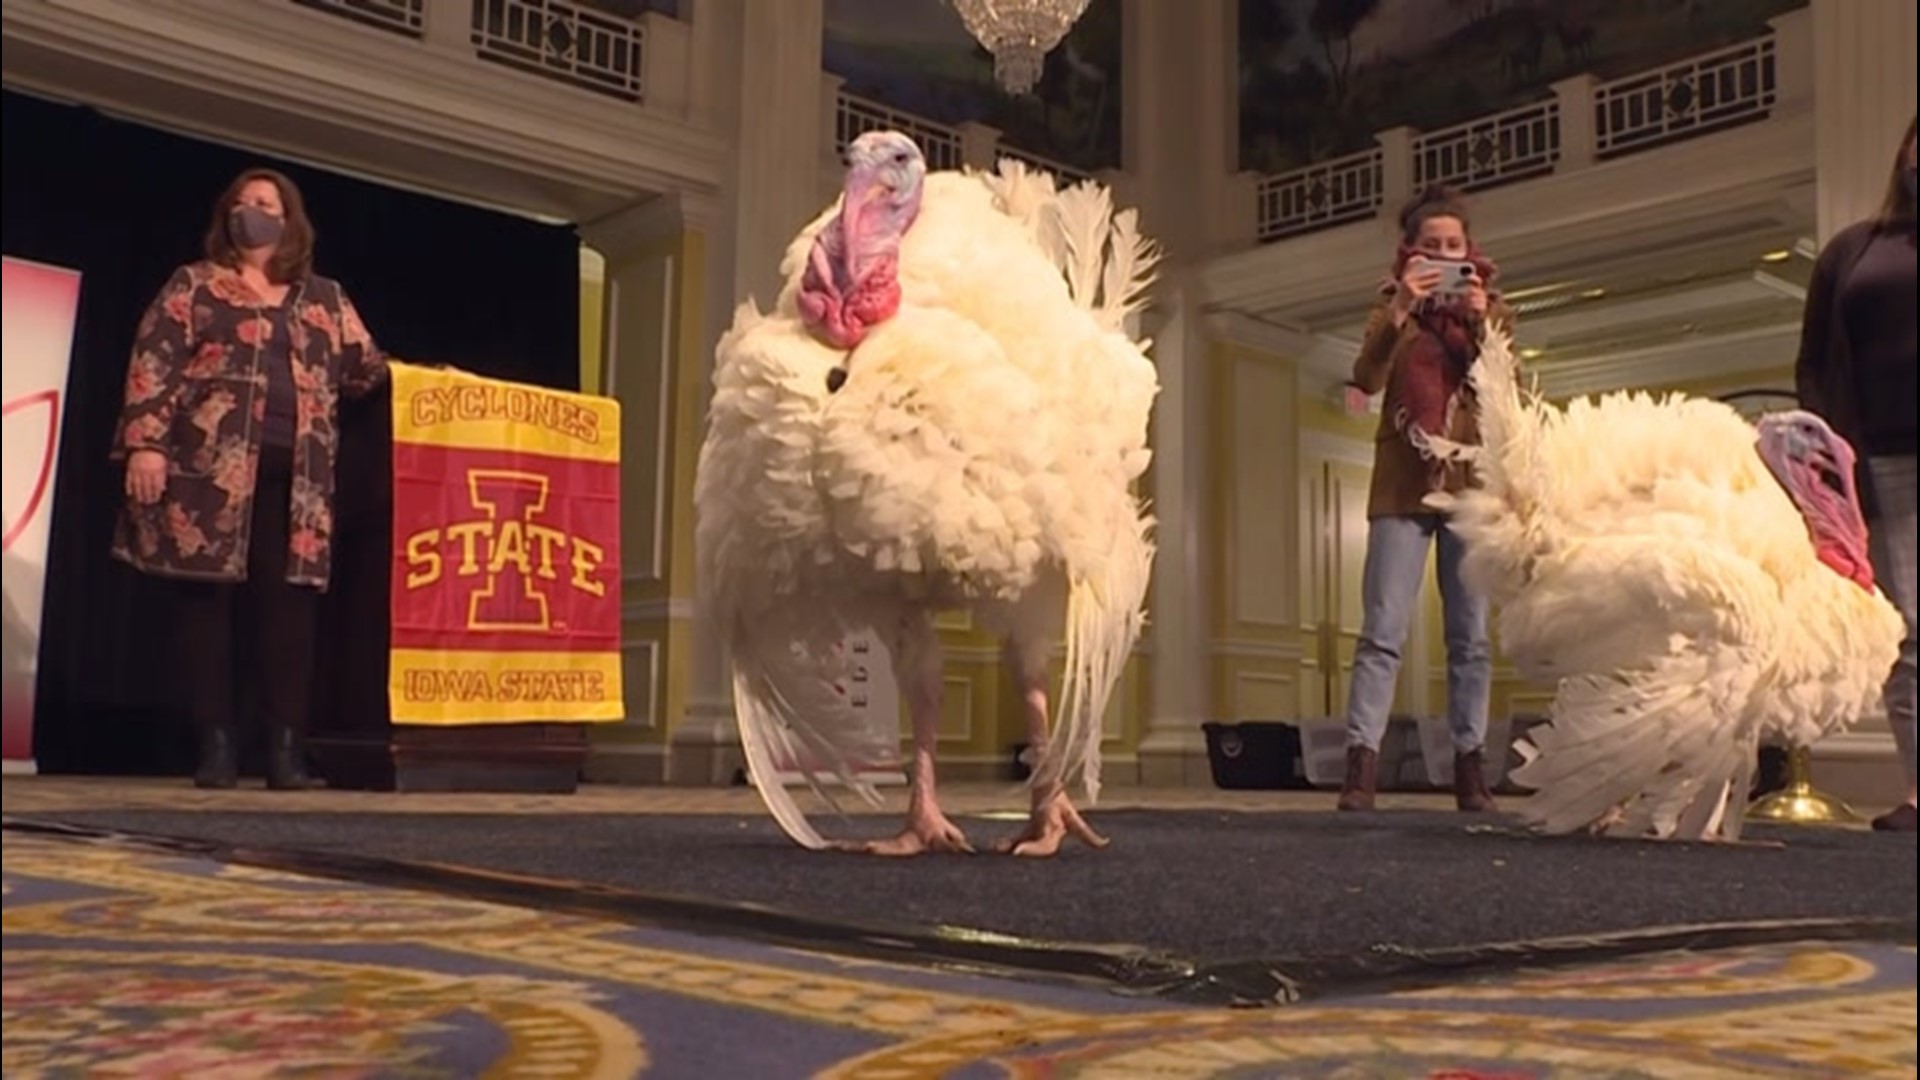 Two turkey's, Corn and Cob, made their debut in Washington, D.C. on Nov. 23, ahead of their presidential pardon on Nov. 24. Only one turkey will be pardoned, but both will go on to live the remainder of their lives at Iowa State University.